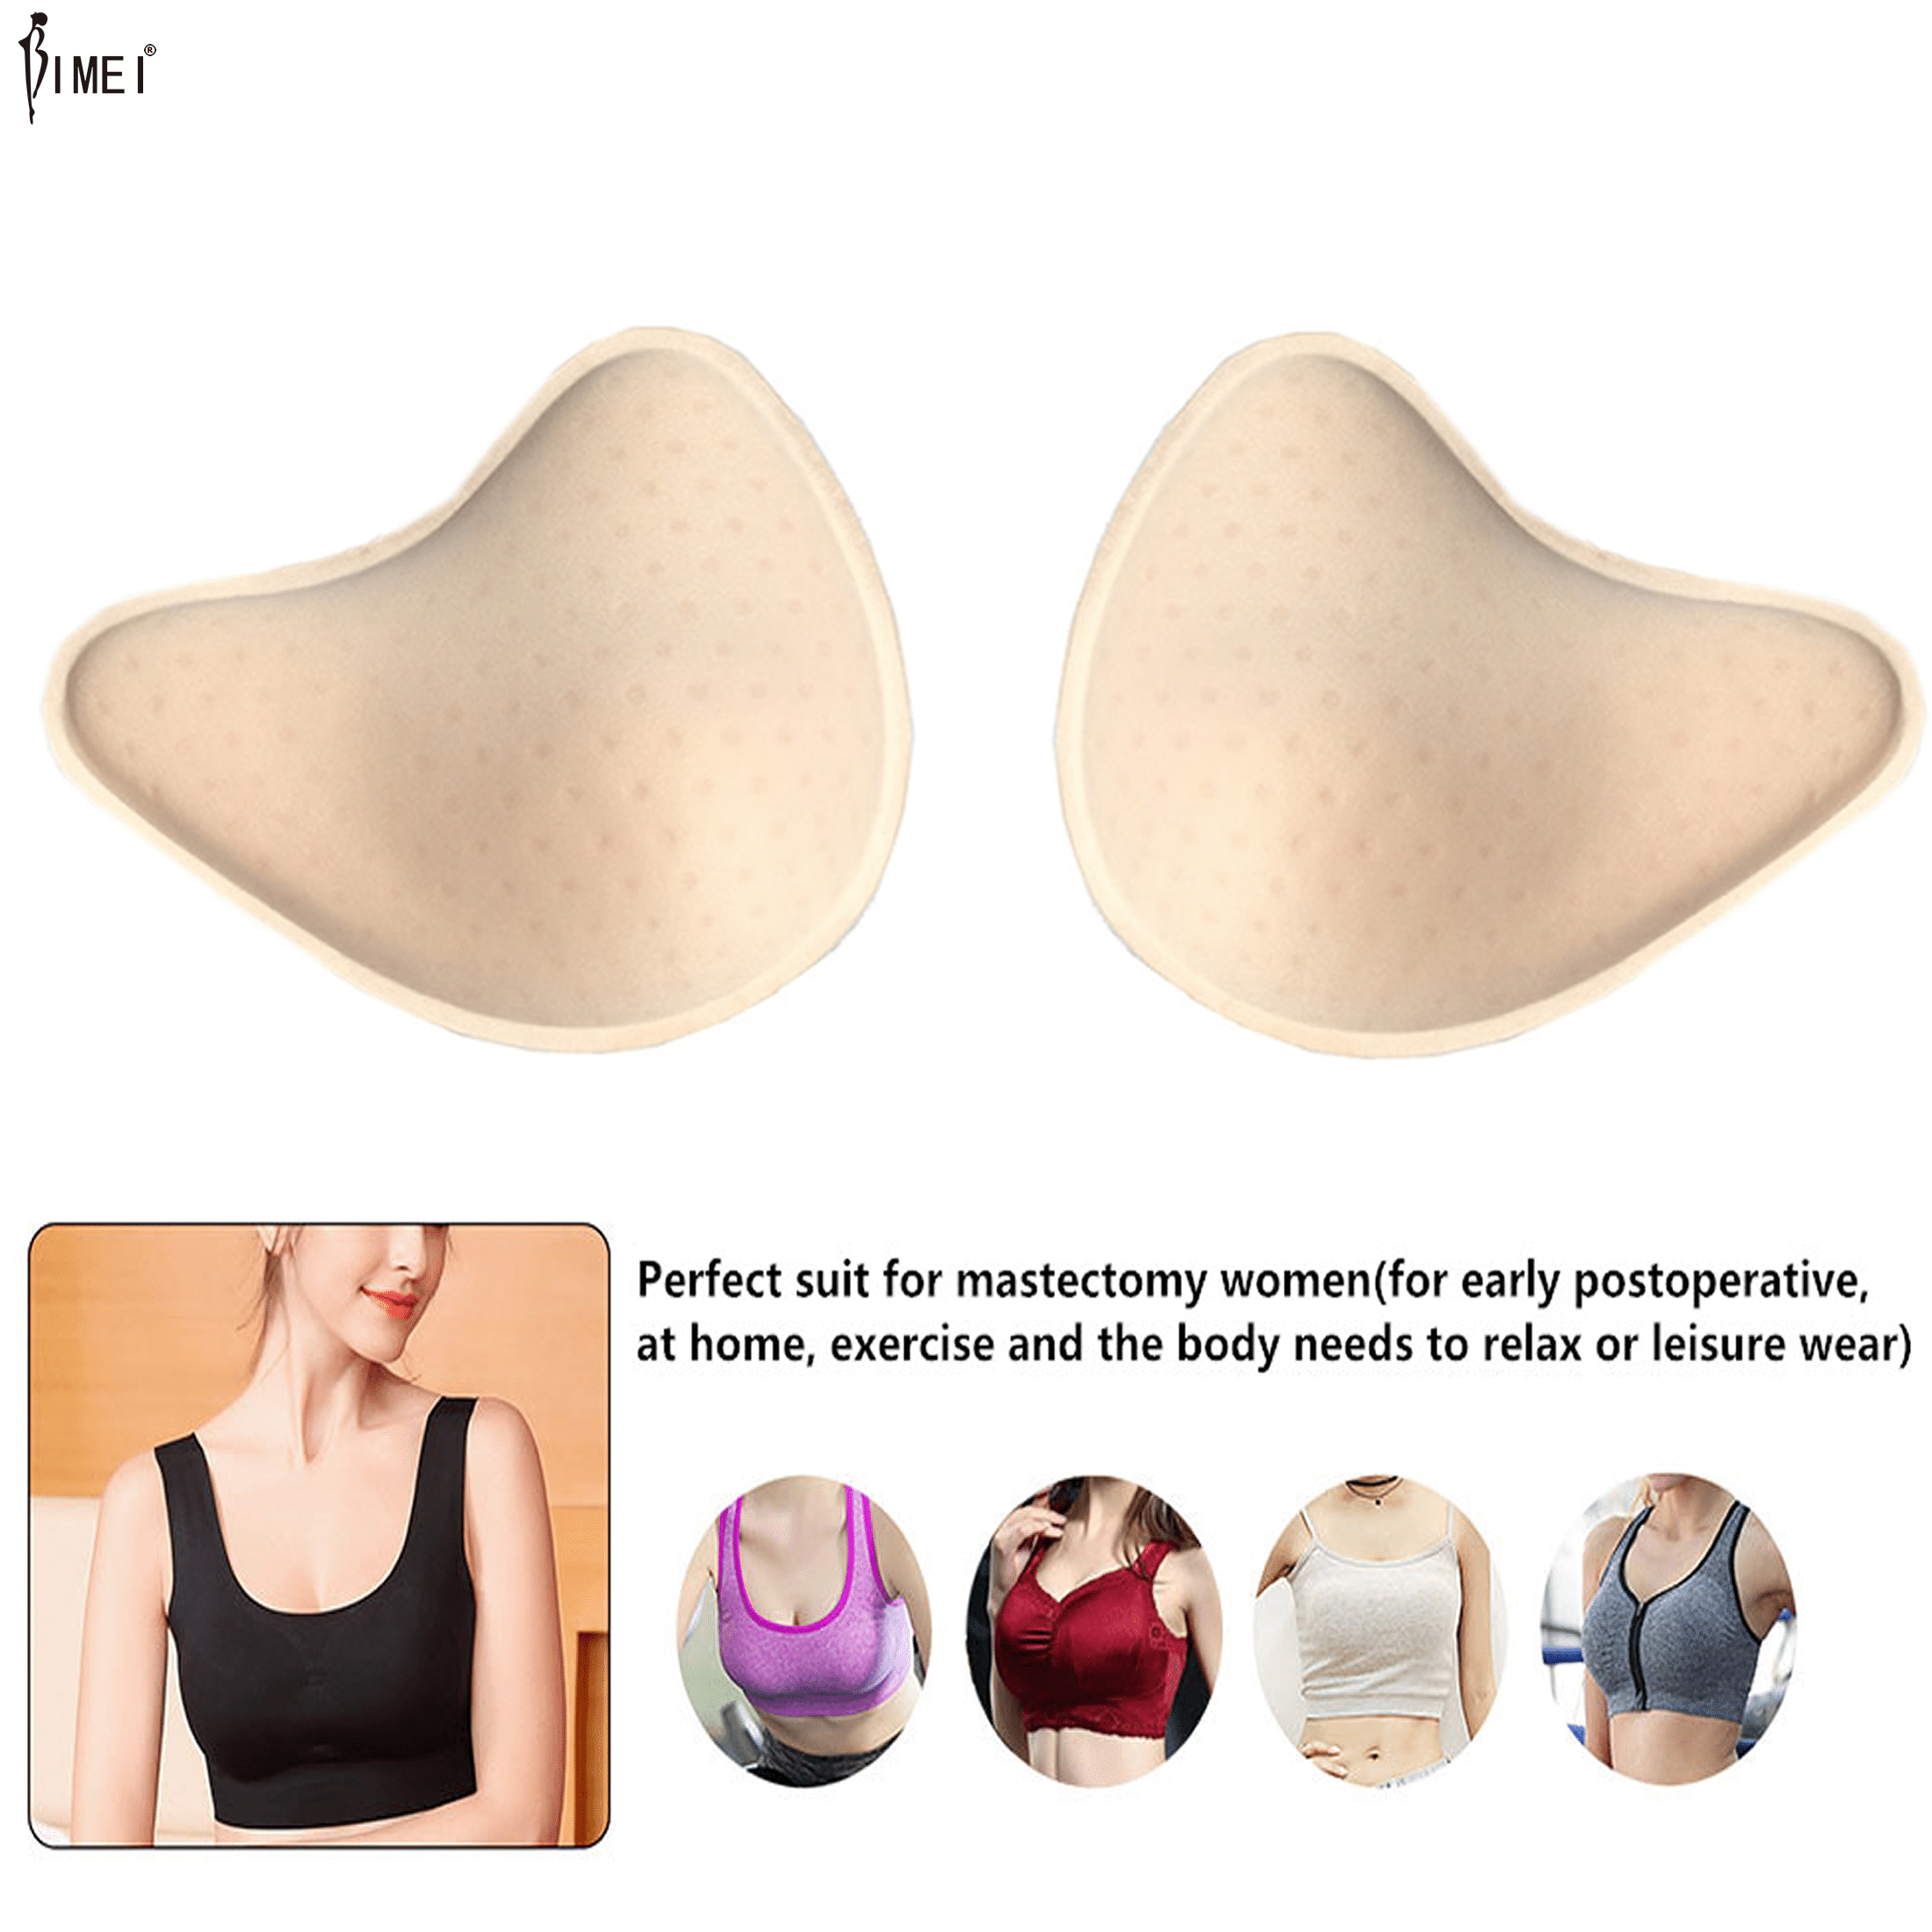 BIMEI Round Soft Bra Inserts Pads A Pair for Sports Bras Women's Push Up  Bra Inserts Breast Enhancer Cups Removable Mastectomy Bra Inserts For  Bikini